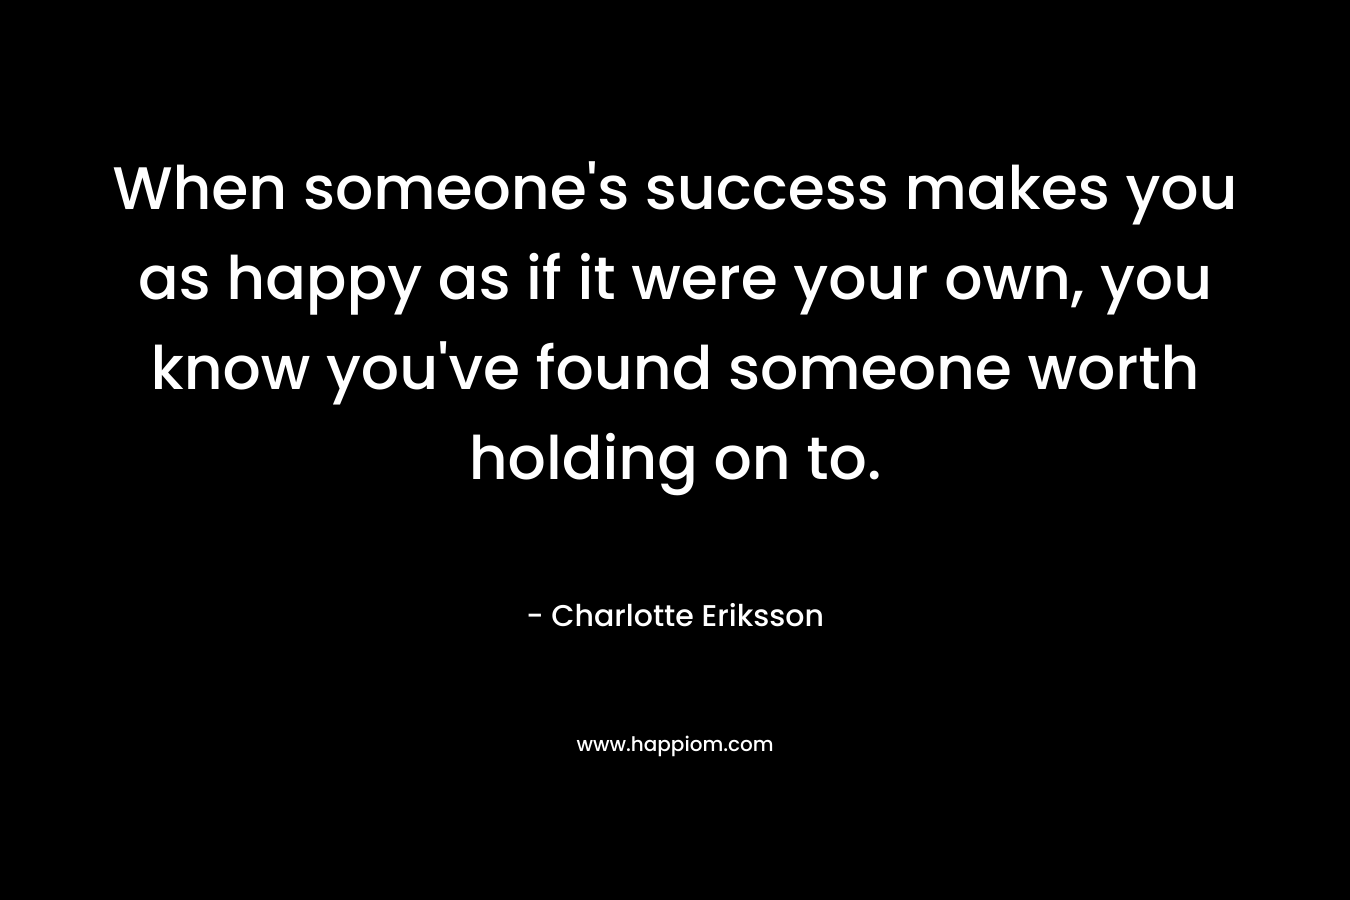 When someone's success makes you as happy as if it were your own, you know you've found someone worth holding on to.